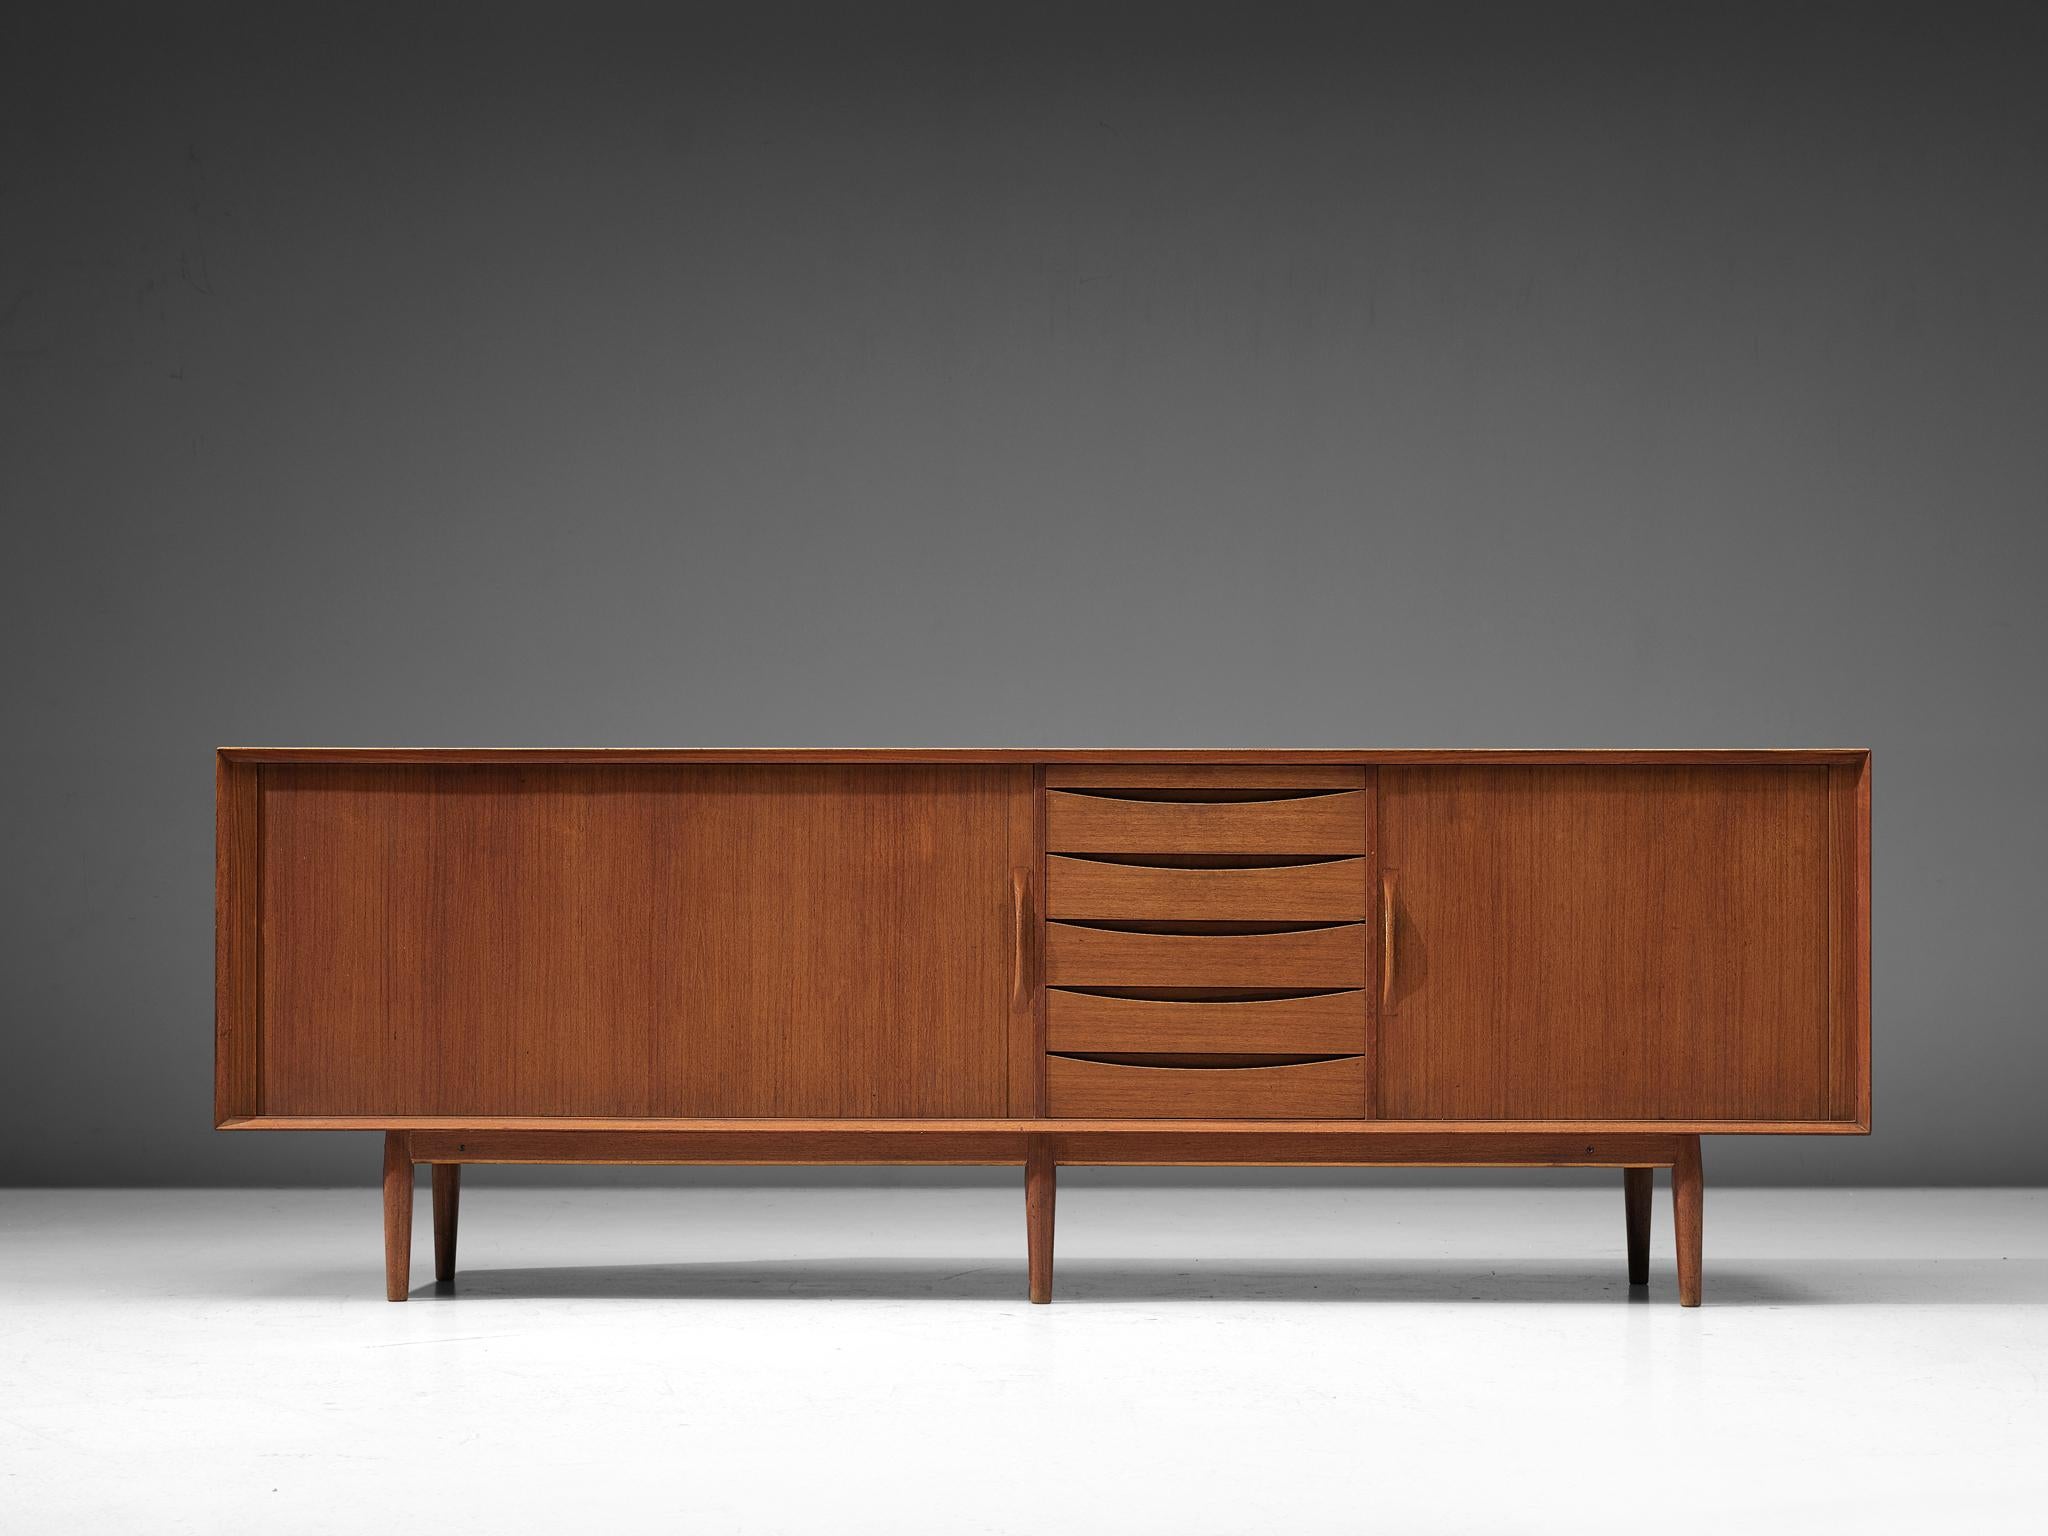 Arne Vodder for Sibast Møbler, sideboard model 76, teak, Denmark, 1959

This iconic sideboard in teak is designed by the Danish designer Arne Vodder. He was especially known for his sideboards, sofas and desks that had a special characteristic and